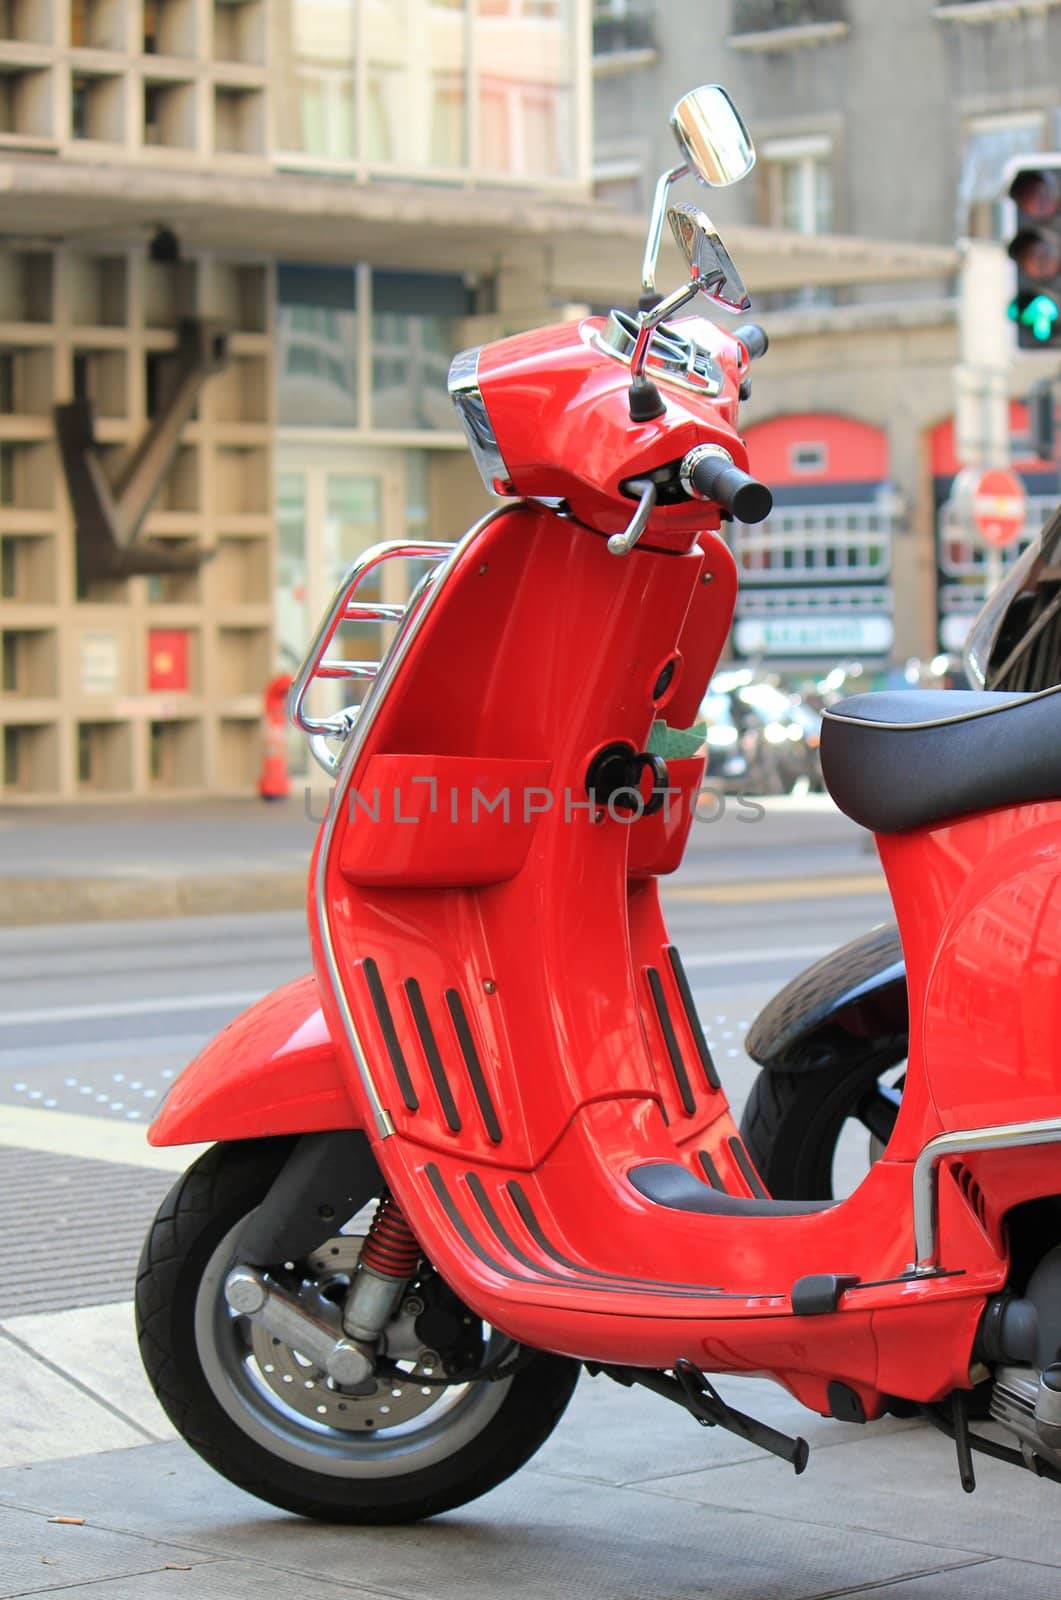 Red scooter parked in the city street